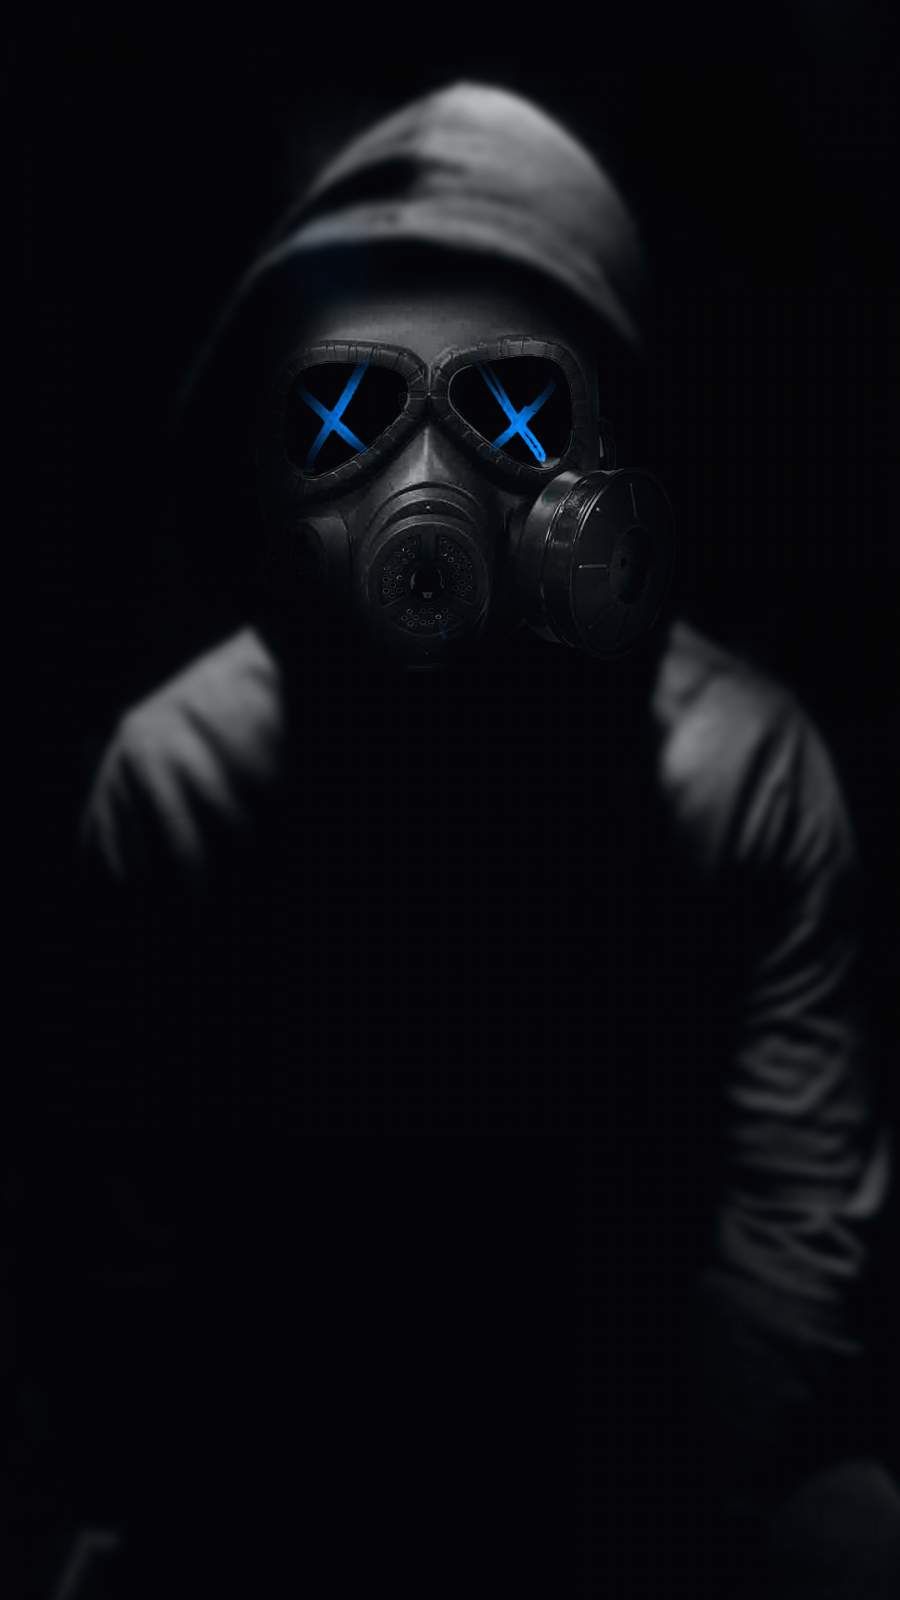 Gas Mask iPhone Wallpaper. Gas mask